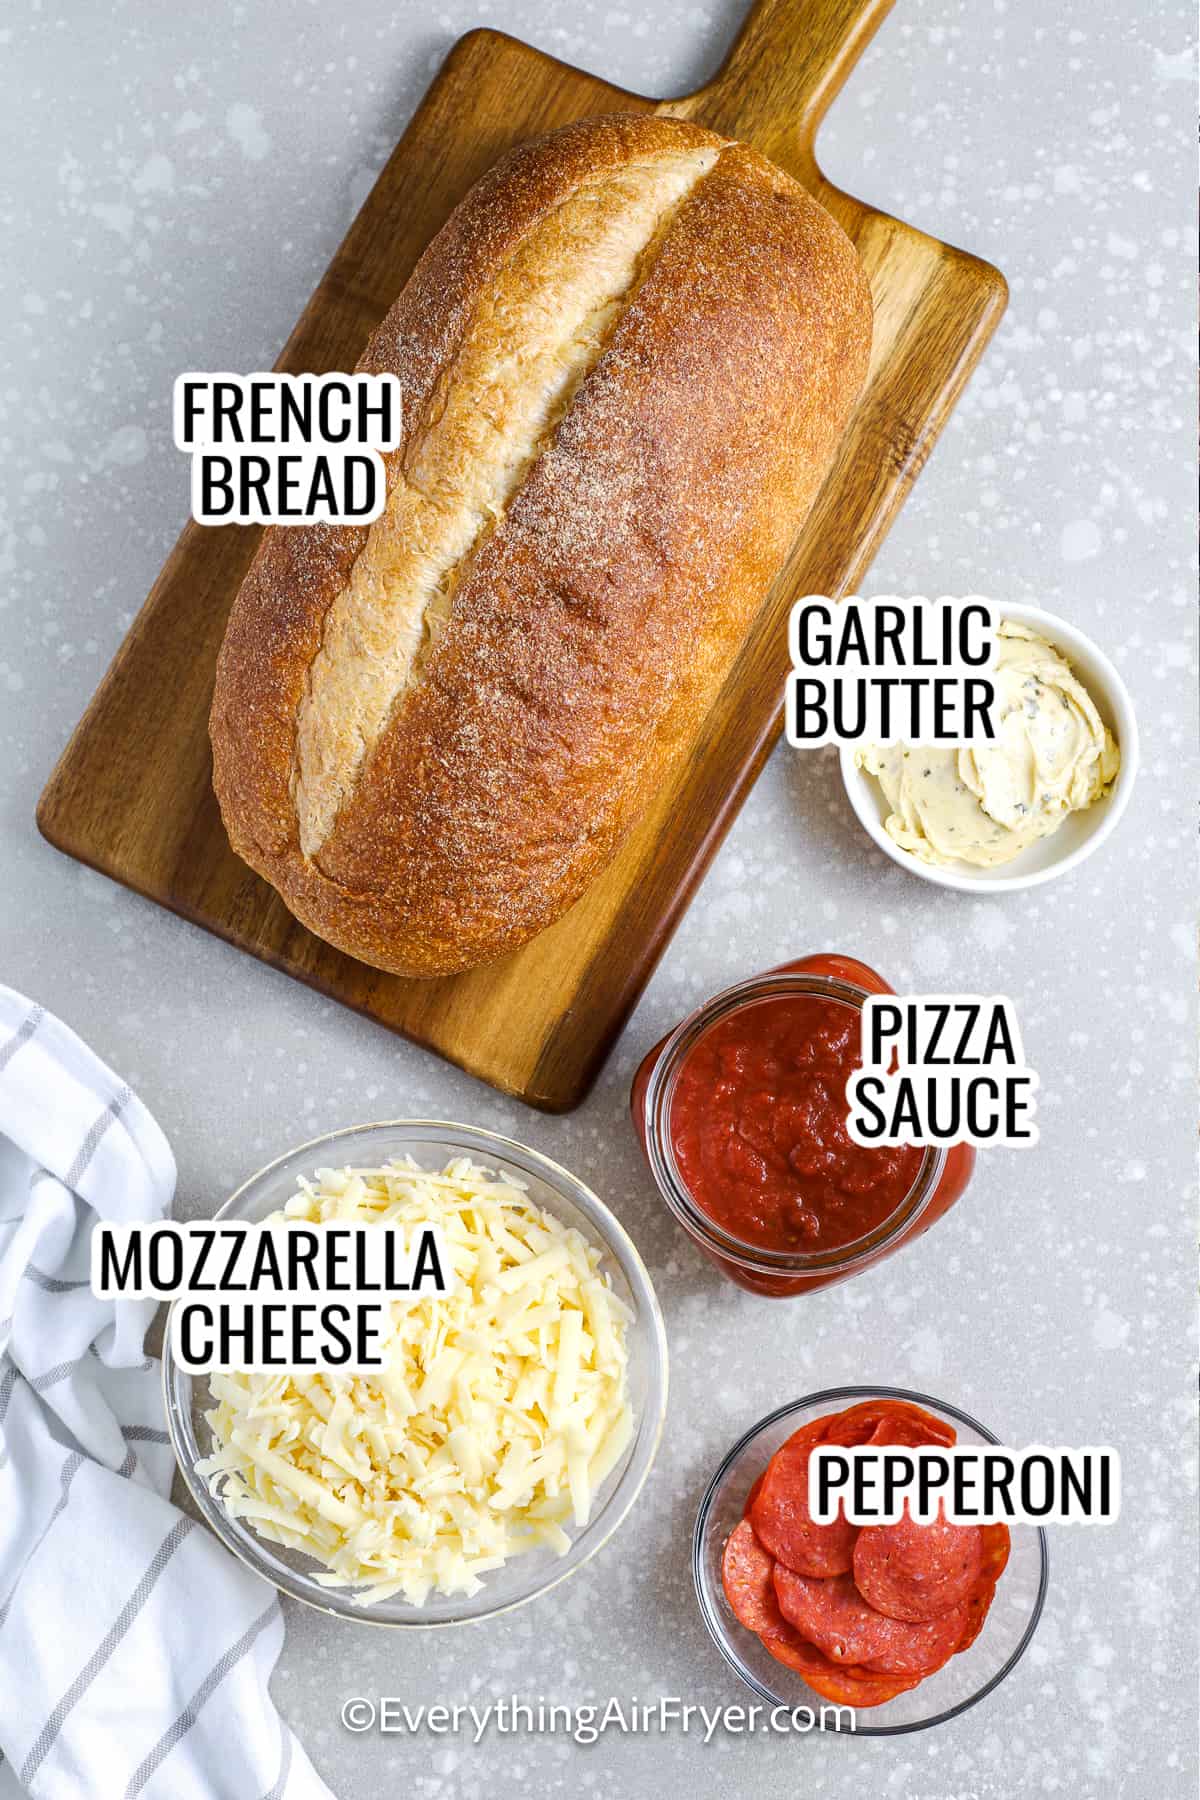 ingredients assembled to make air fryer french bread pizza, including french bread, mozzarella cheese, pizza sauce, garlic butter, and toppings